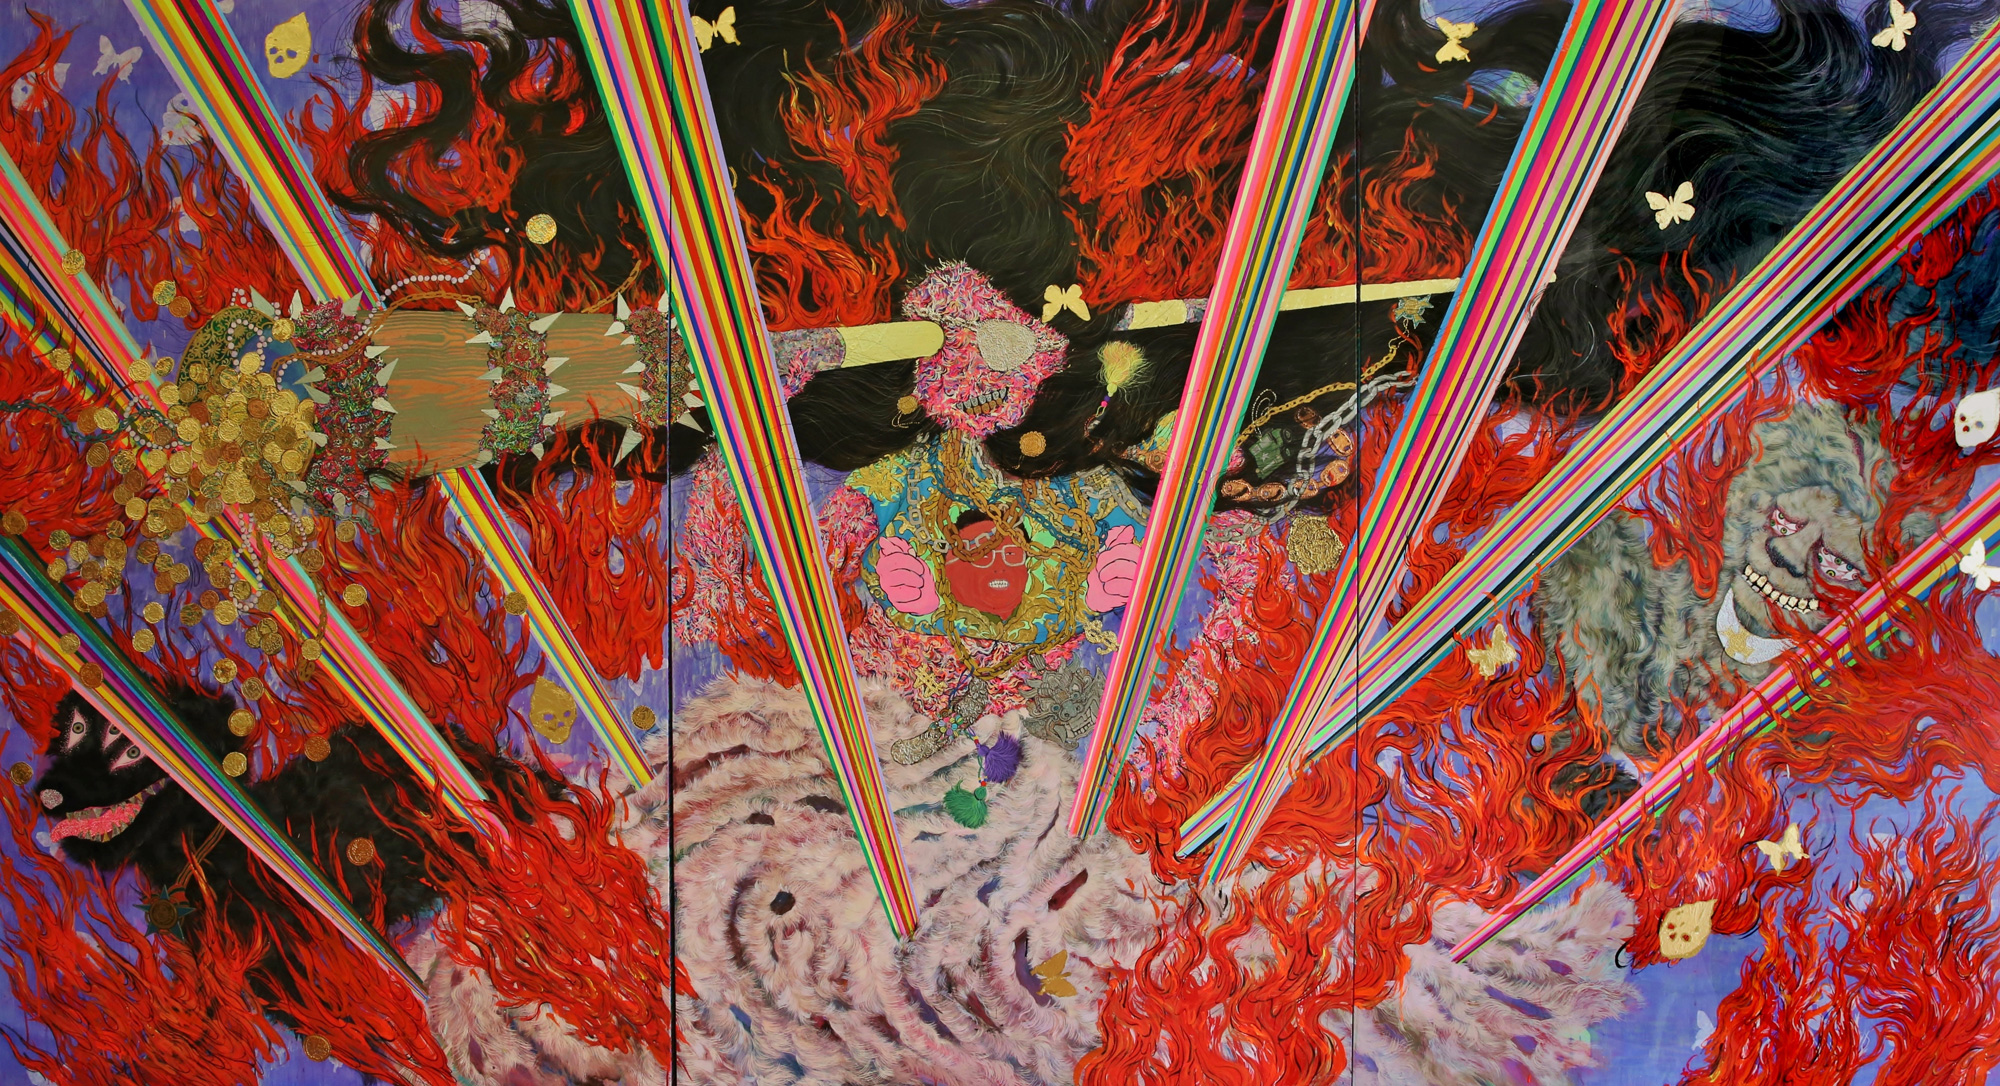 Hyon Gyon Park, Amulet, acrylic and Japanese paper on panel, 79" x 147", 2014